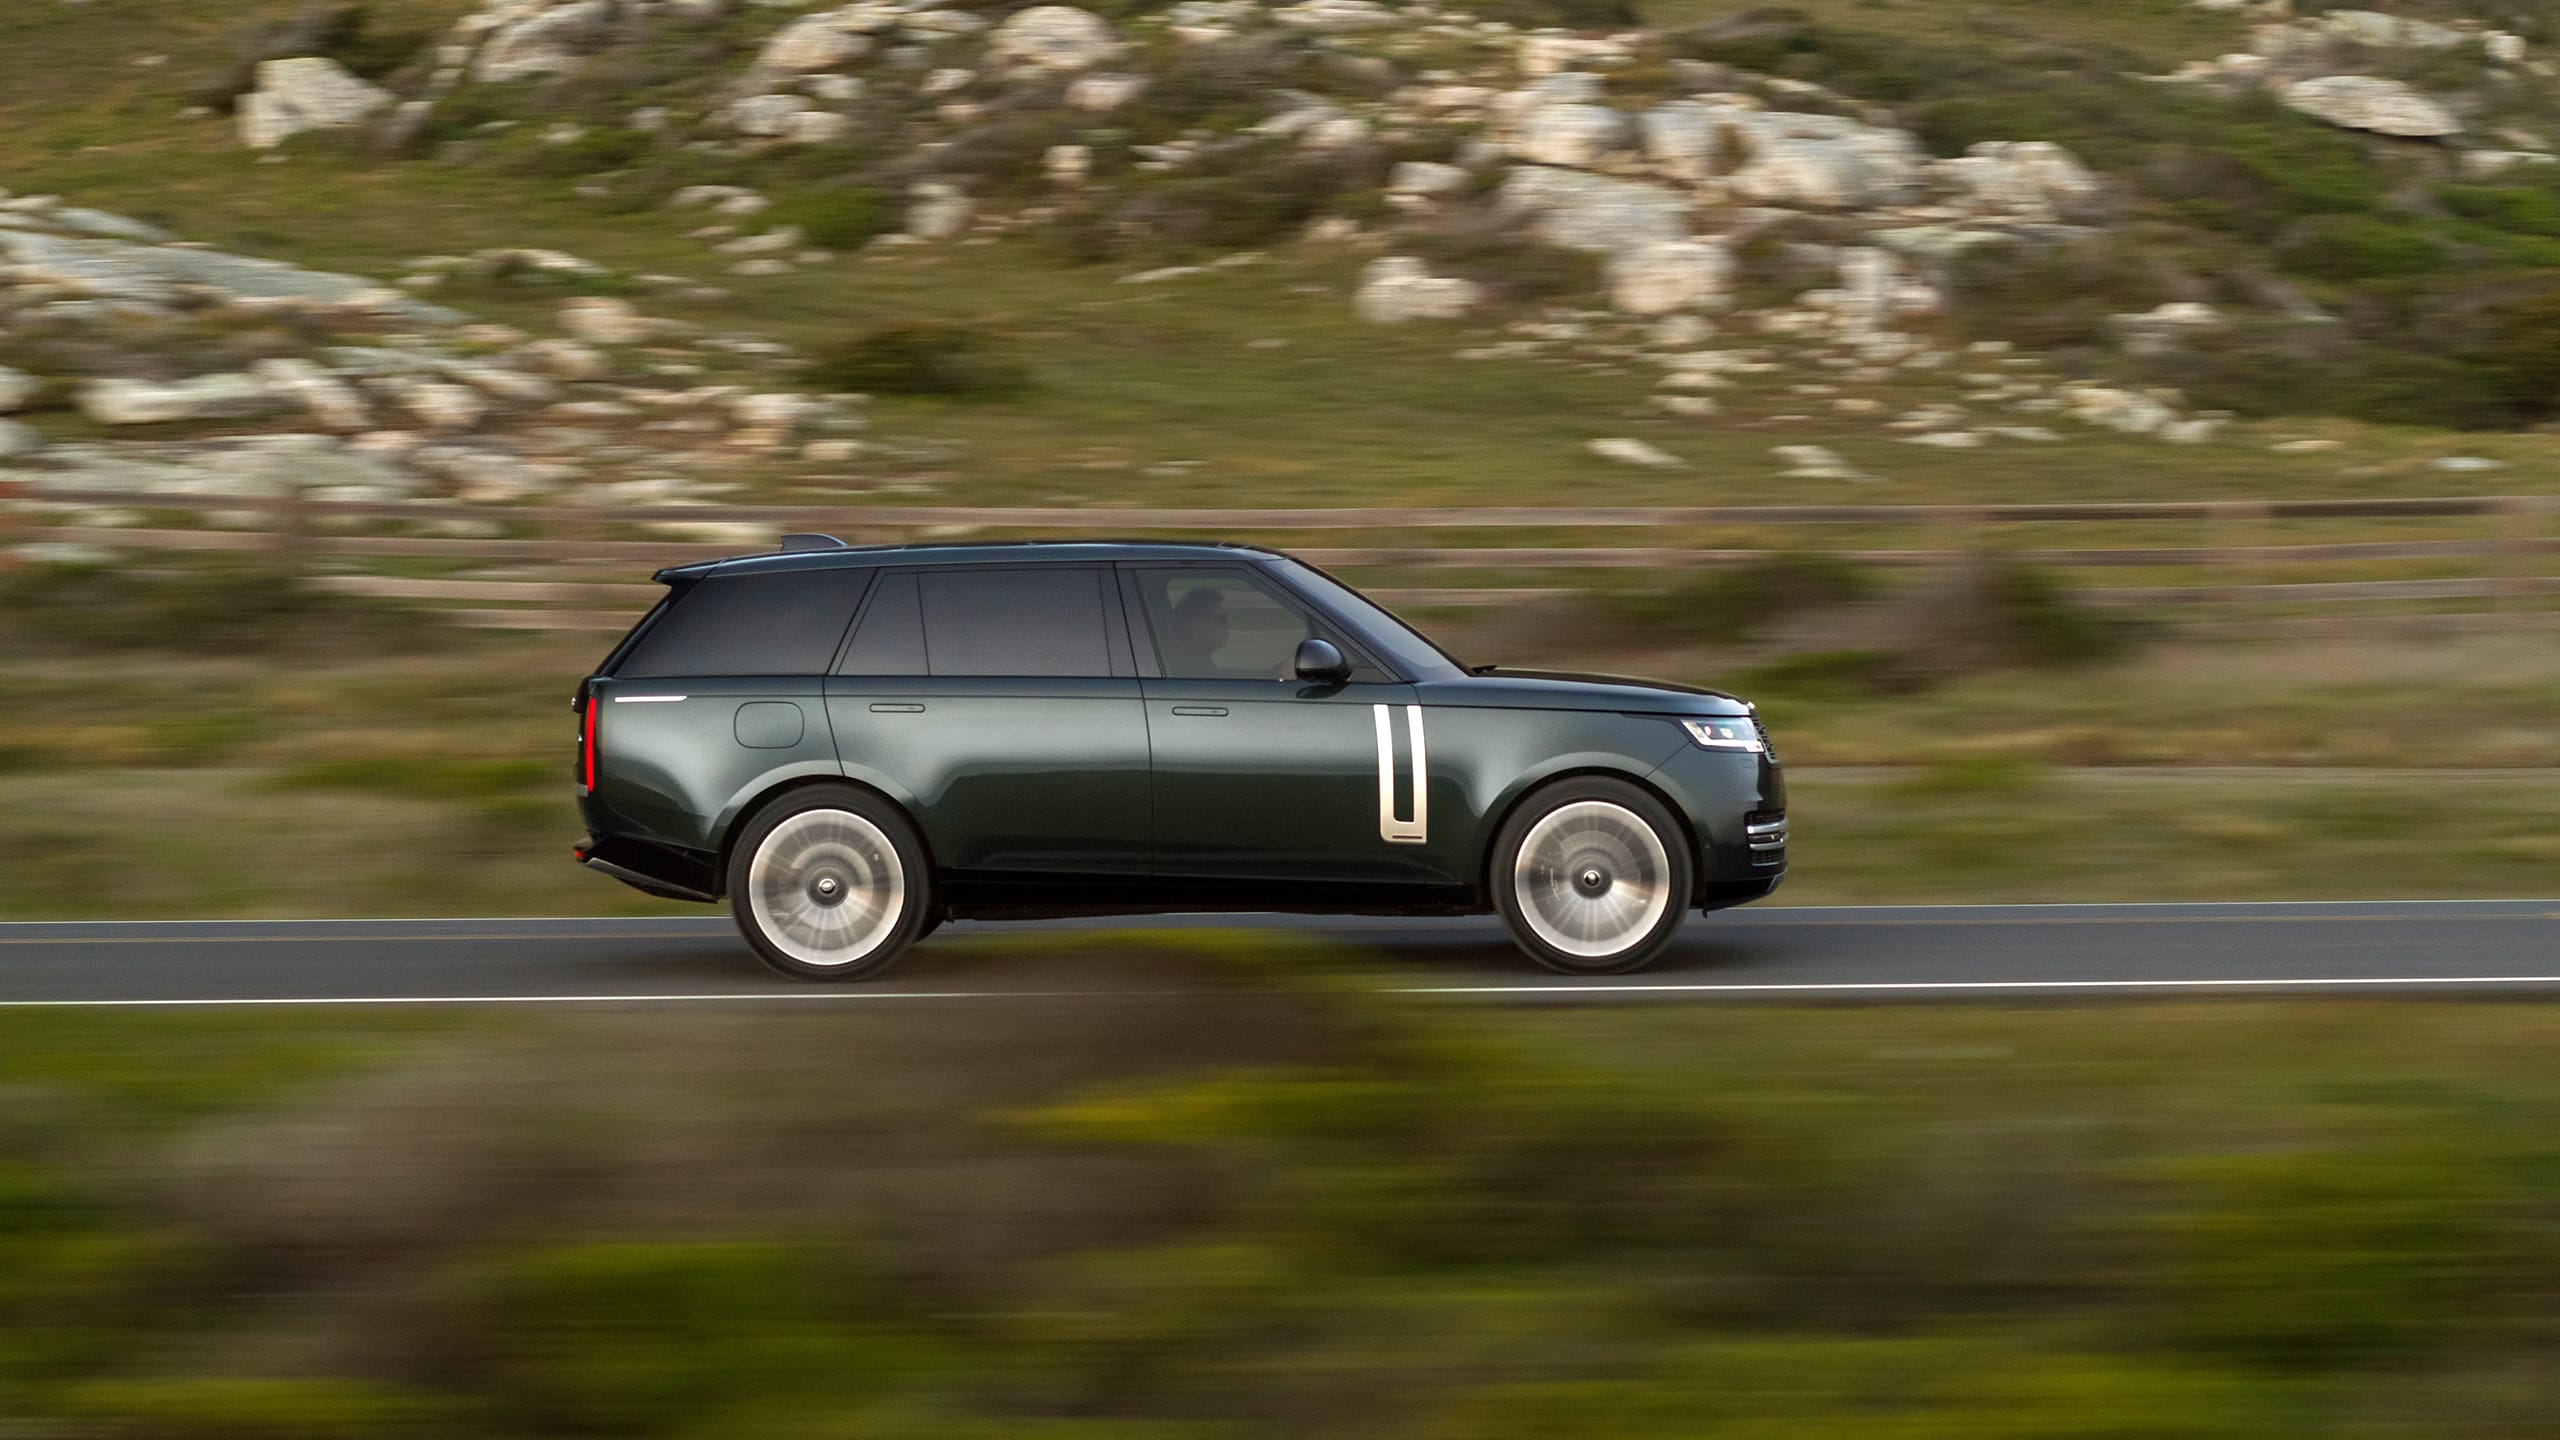 Range Rover rolling on the road